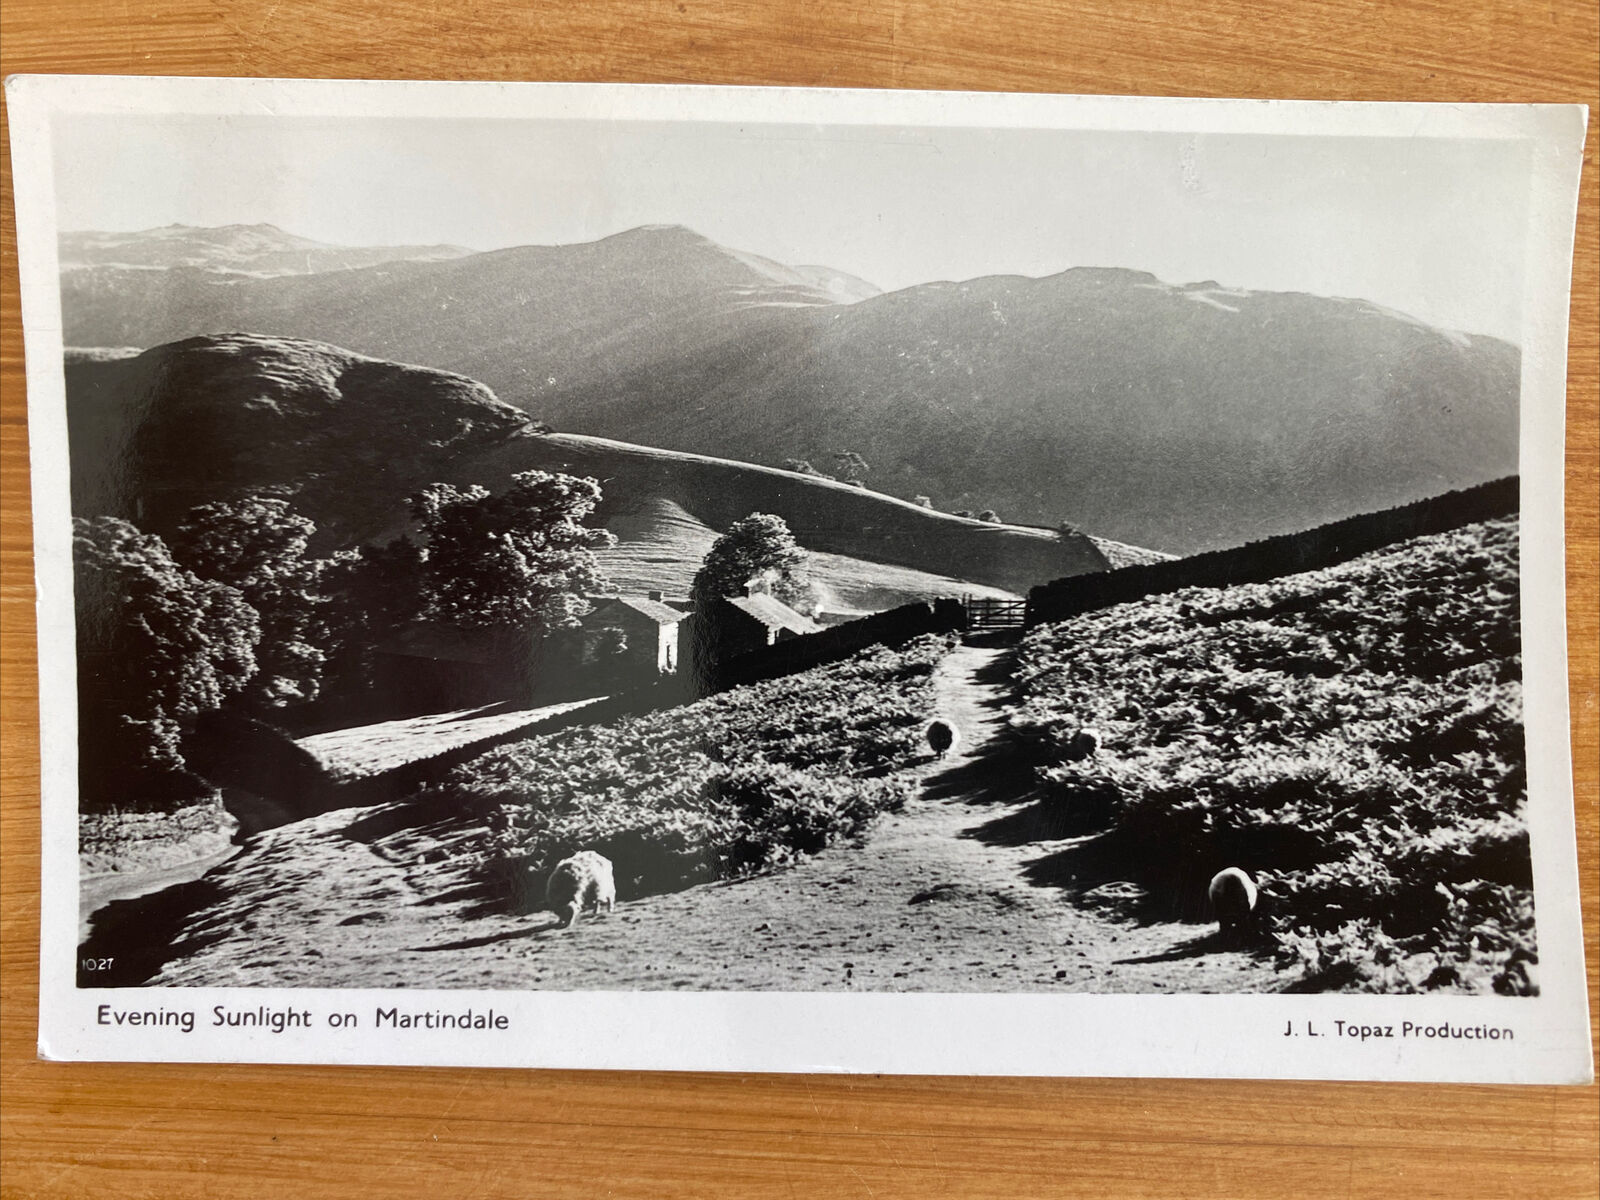 House Clearance - Cumbria Service - View of Martindale  Topaz RP 1956 Evening Sunlight